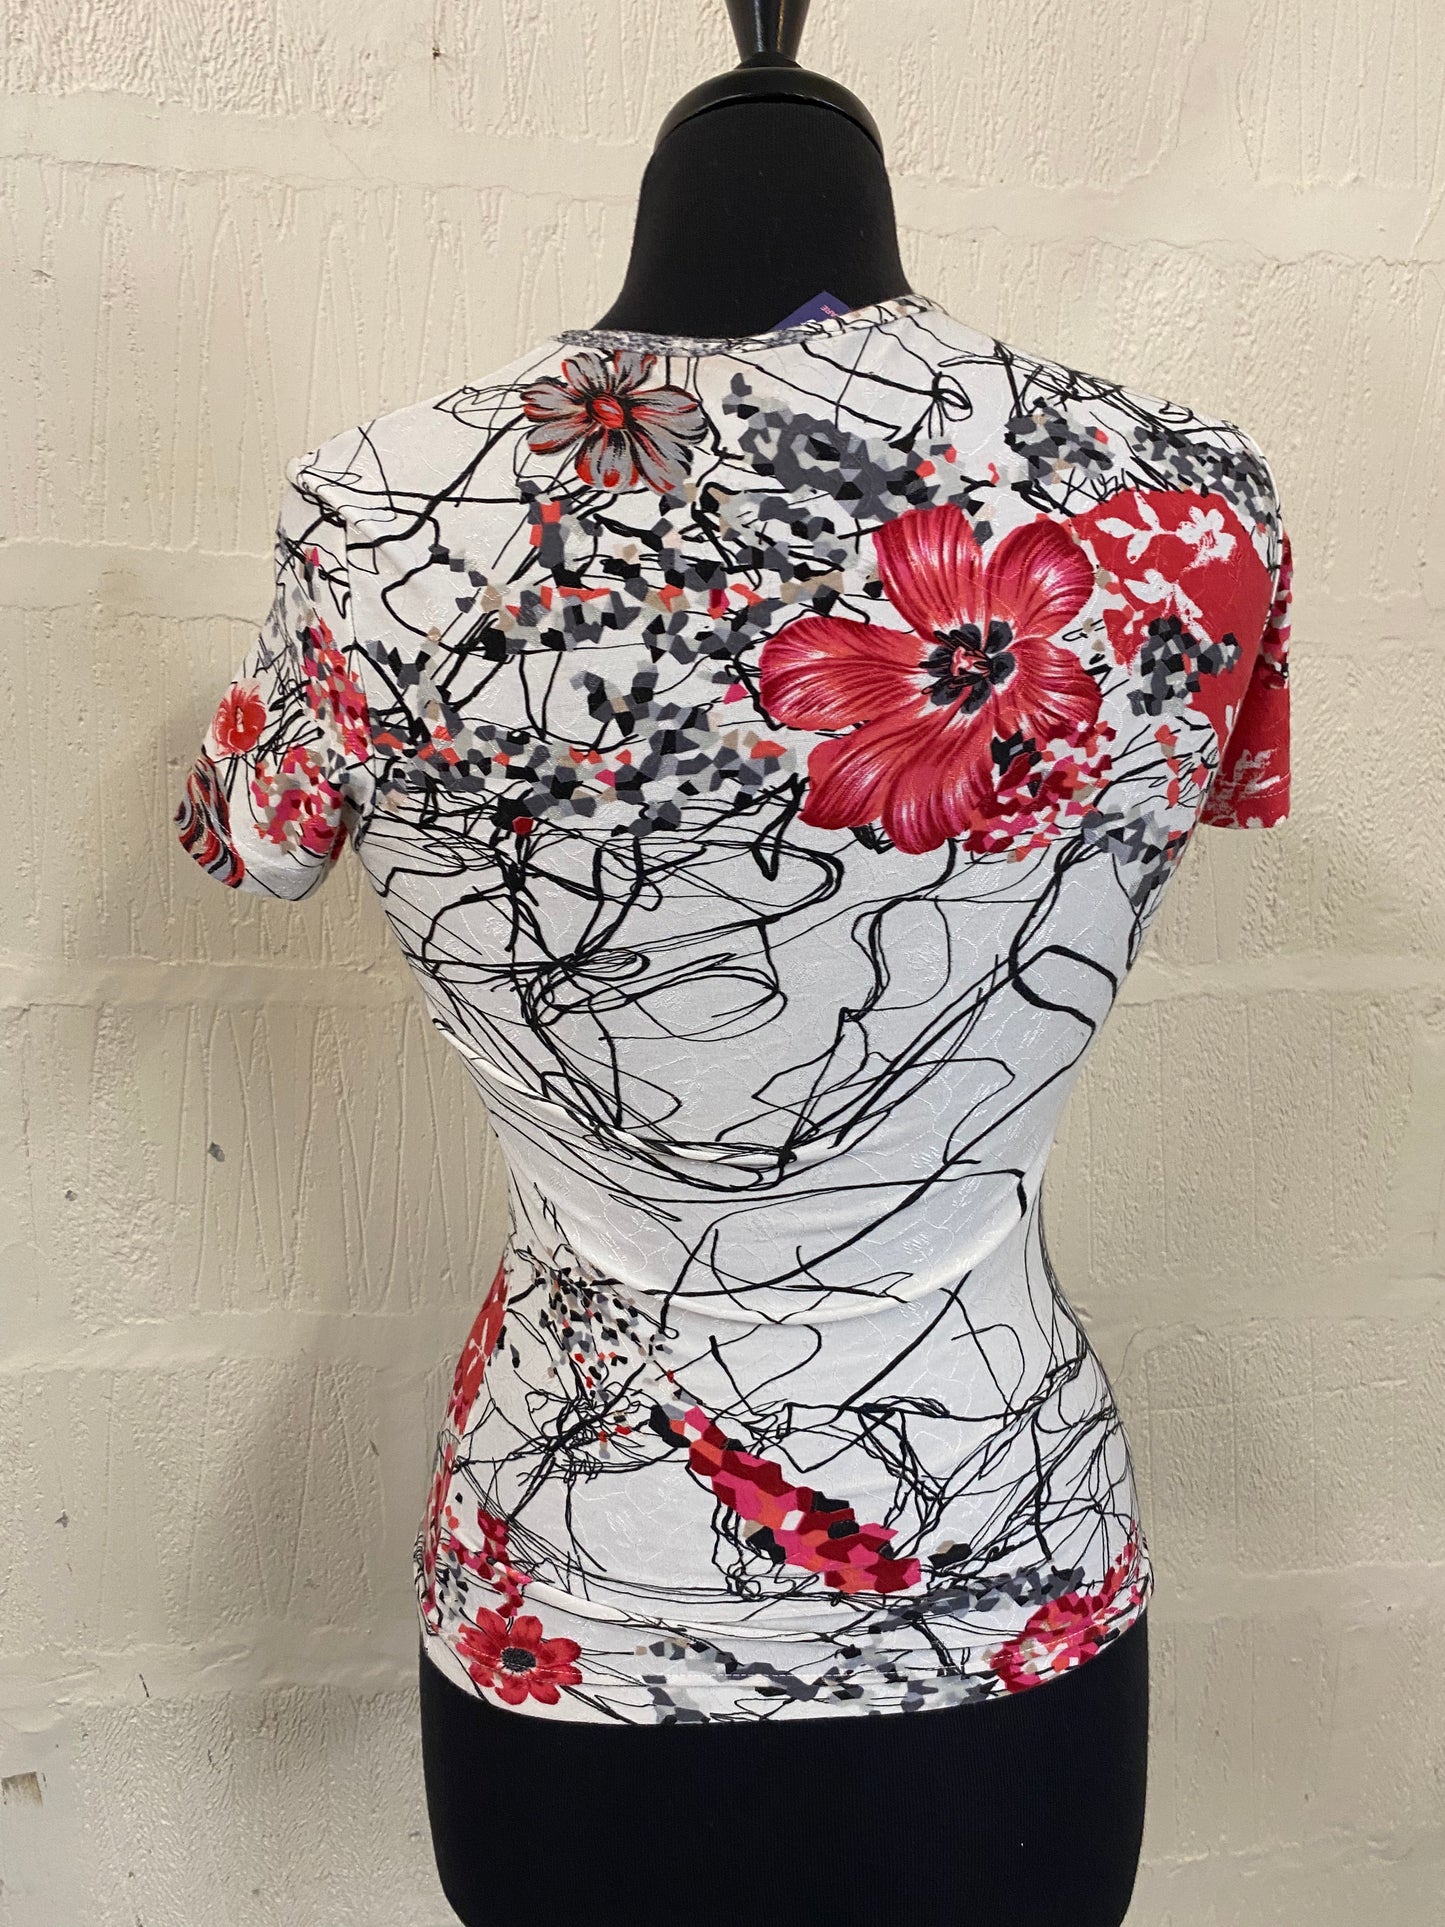 Bazar by Christian Lacroix Red and Black Graphic Top Size S